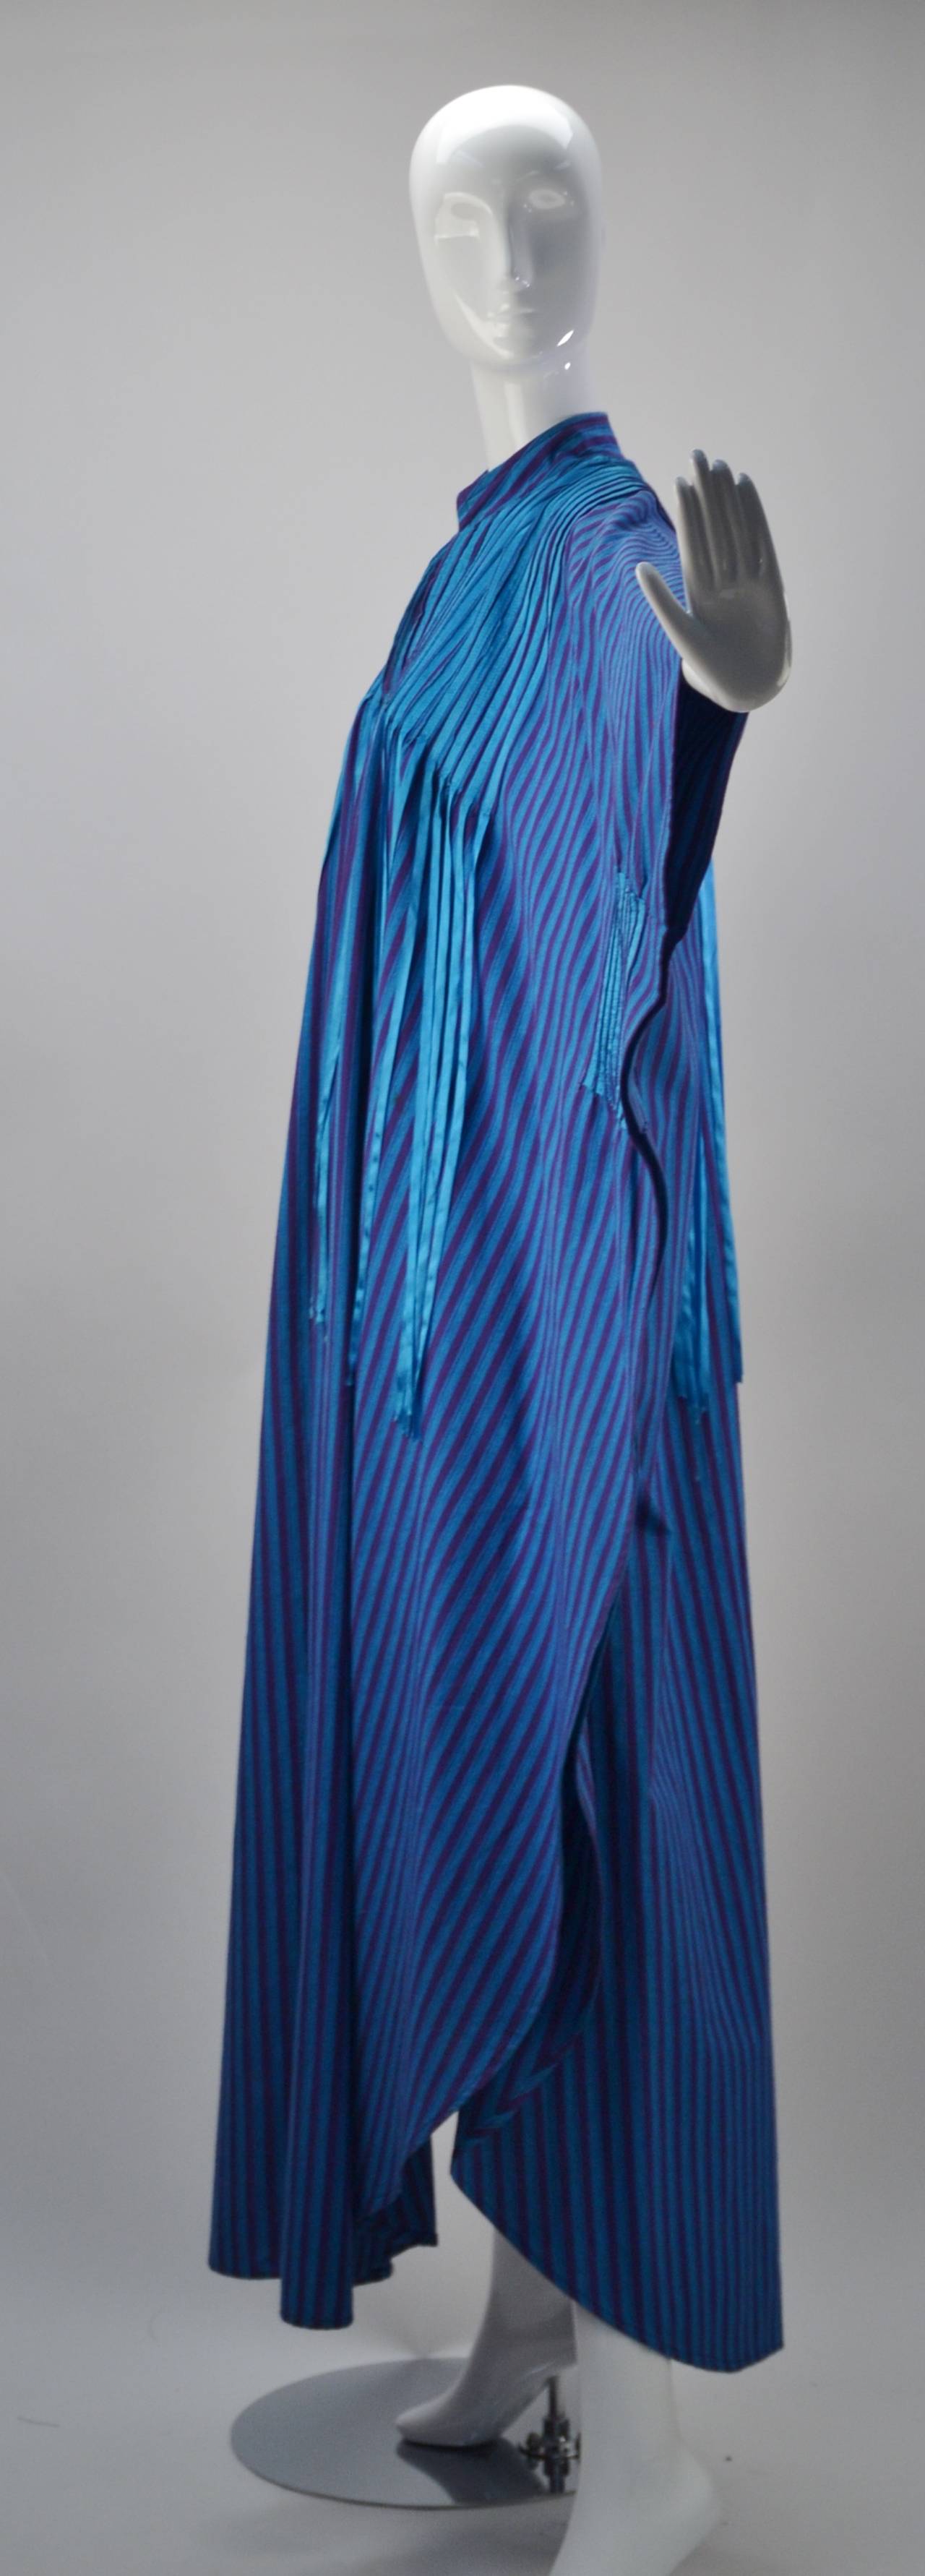 Unbelievable Josefa caftan!  Vibrant cotton canvas in blue and purple with blue ribbon details is both pure comfort and makes a statement -- a great statement!!!  V-neck with mandarin collar. The gorgeous blue ribbons create beautiful movement when